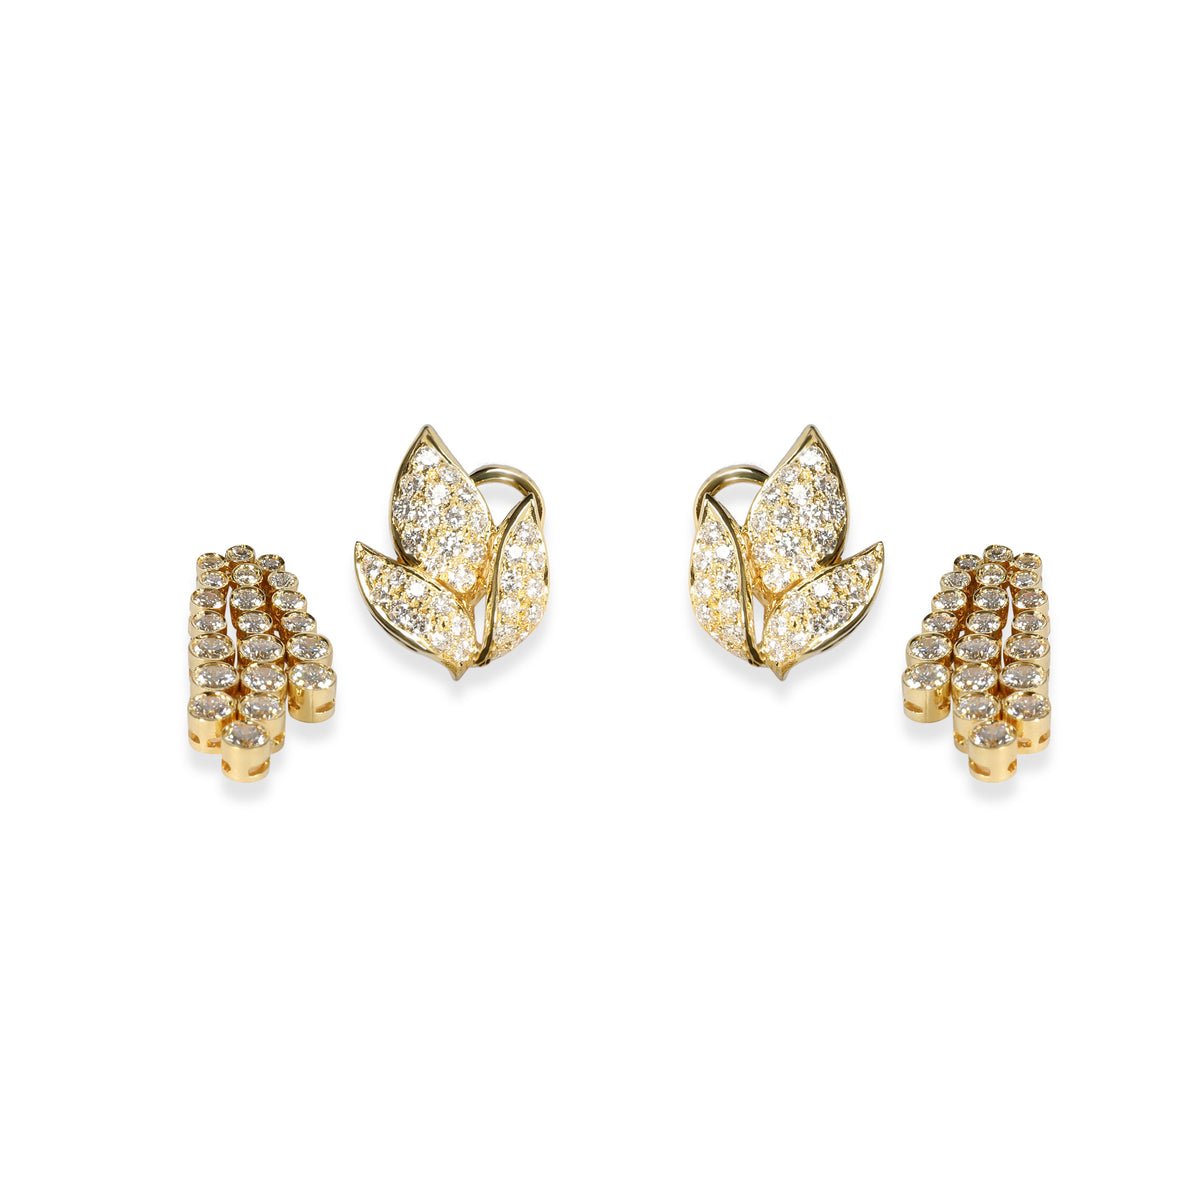 Leaf Earrings with Removable Diamond Drop Spray in 18KT Yellow Gold 2.50 CTW